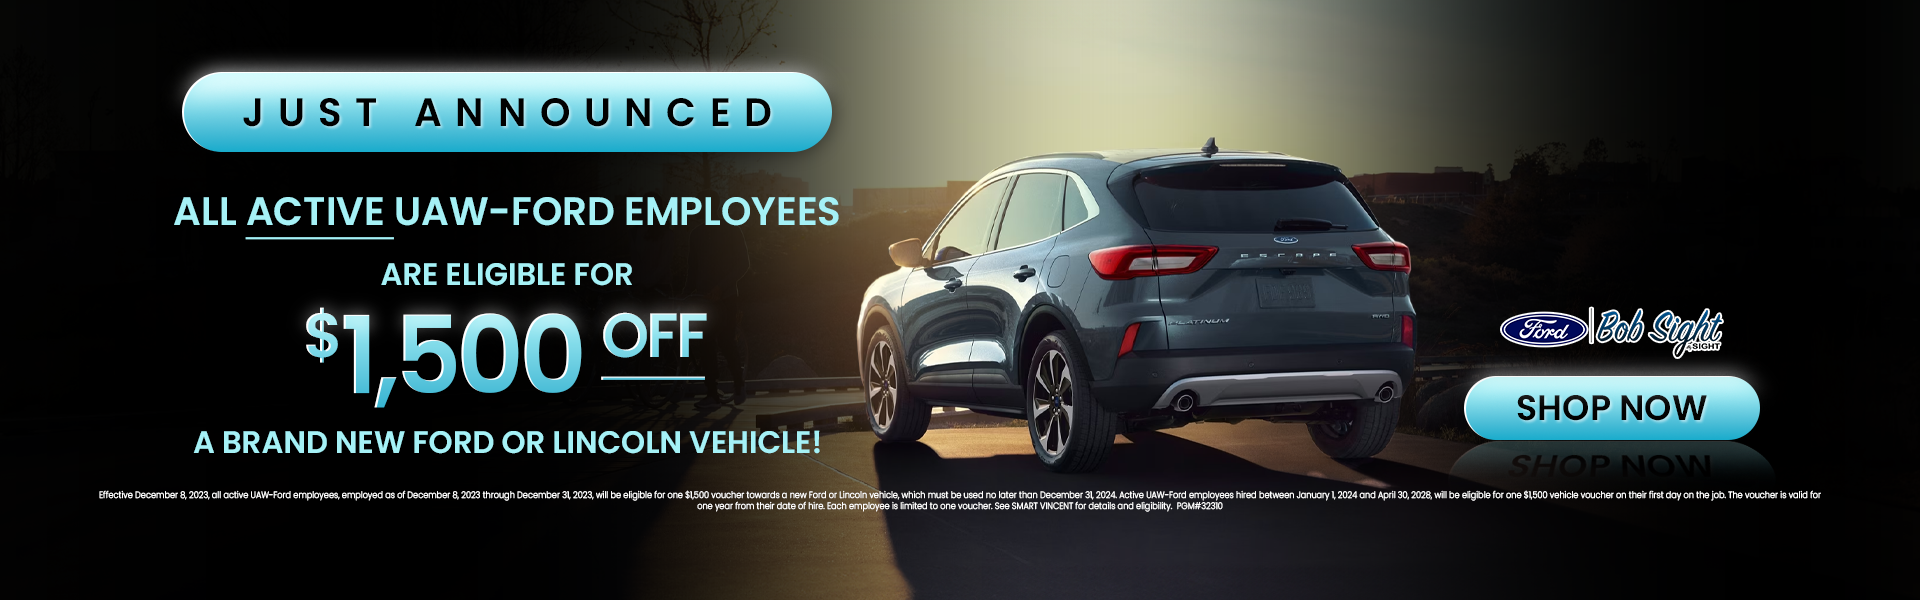 UAW Employee Discount at Kansas City Ford Dealer